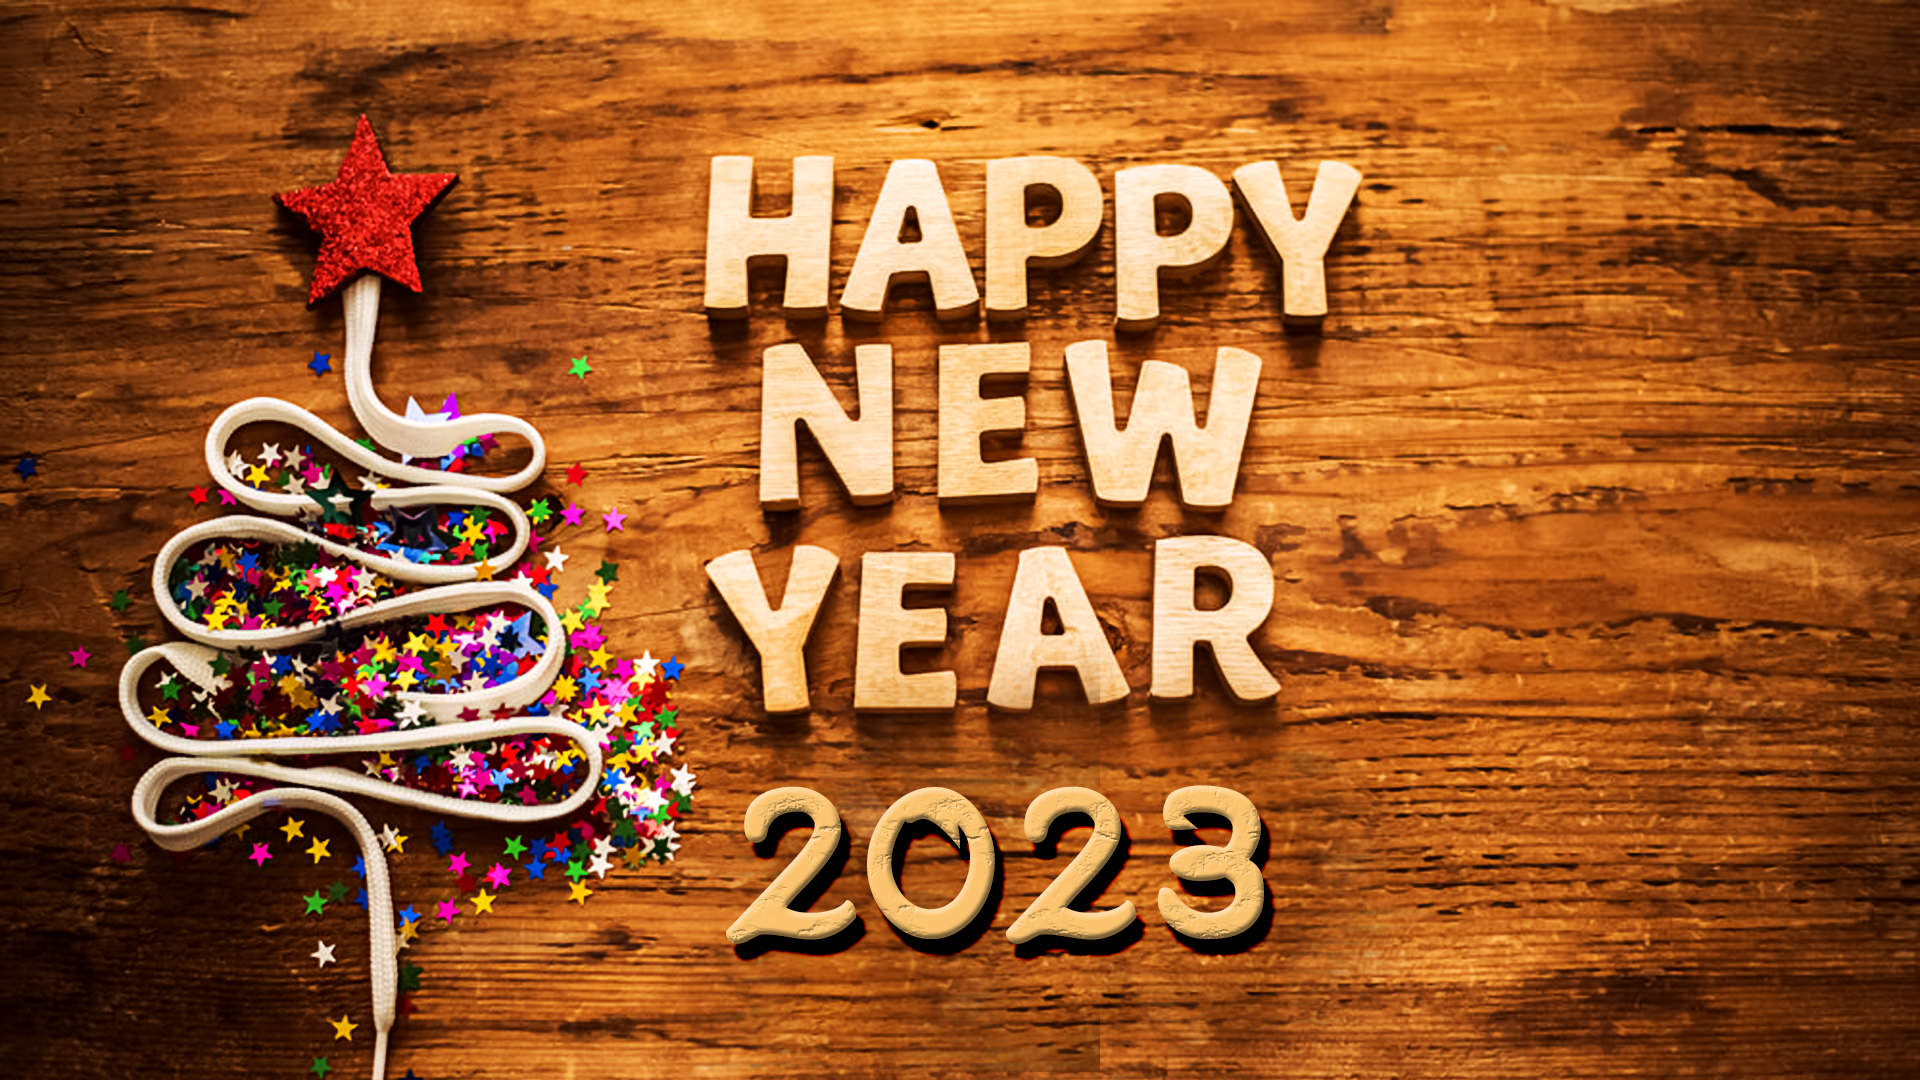 New Year Background Images, HD Pictures and Wallpaper For Free Download |  Pngtree